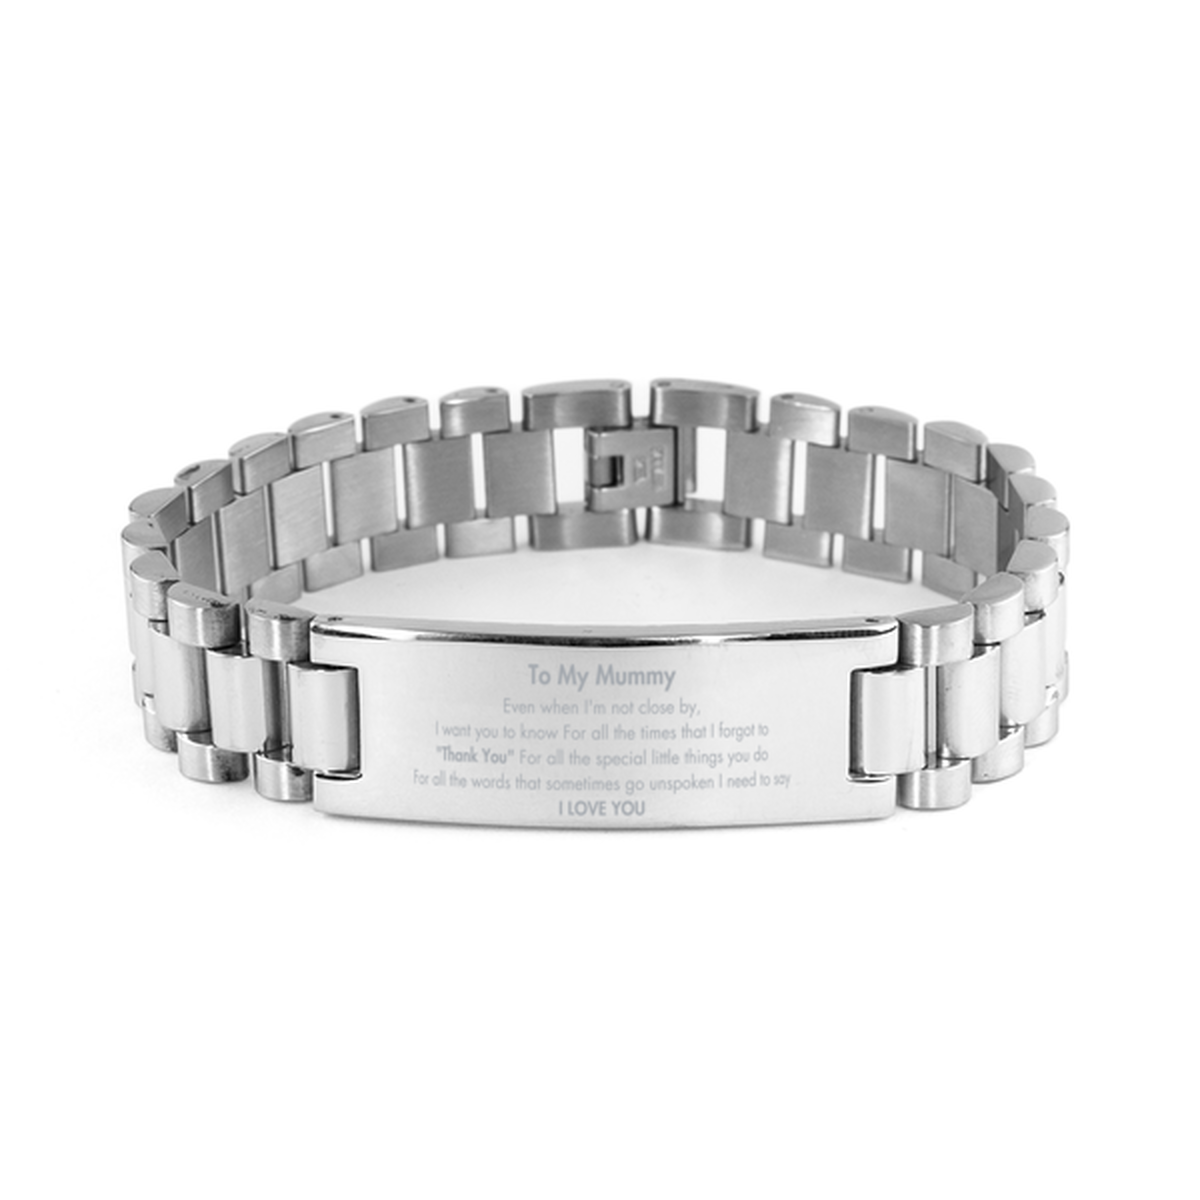 Thank You Gifts for Mummy, Keepsake Ladder Stainless Steel Bracelet Gifts for Mummy Birthday Mother's day Father's Day Mummy For all the words That sometimes go unspoken I need to say I LOVE YOU